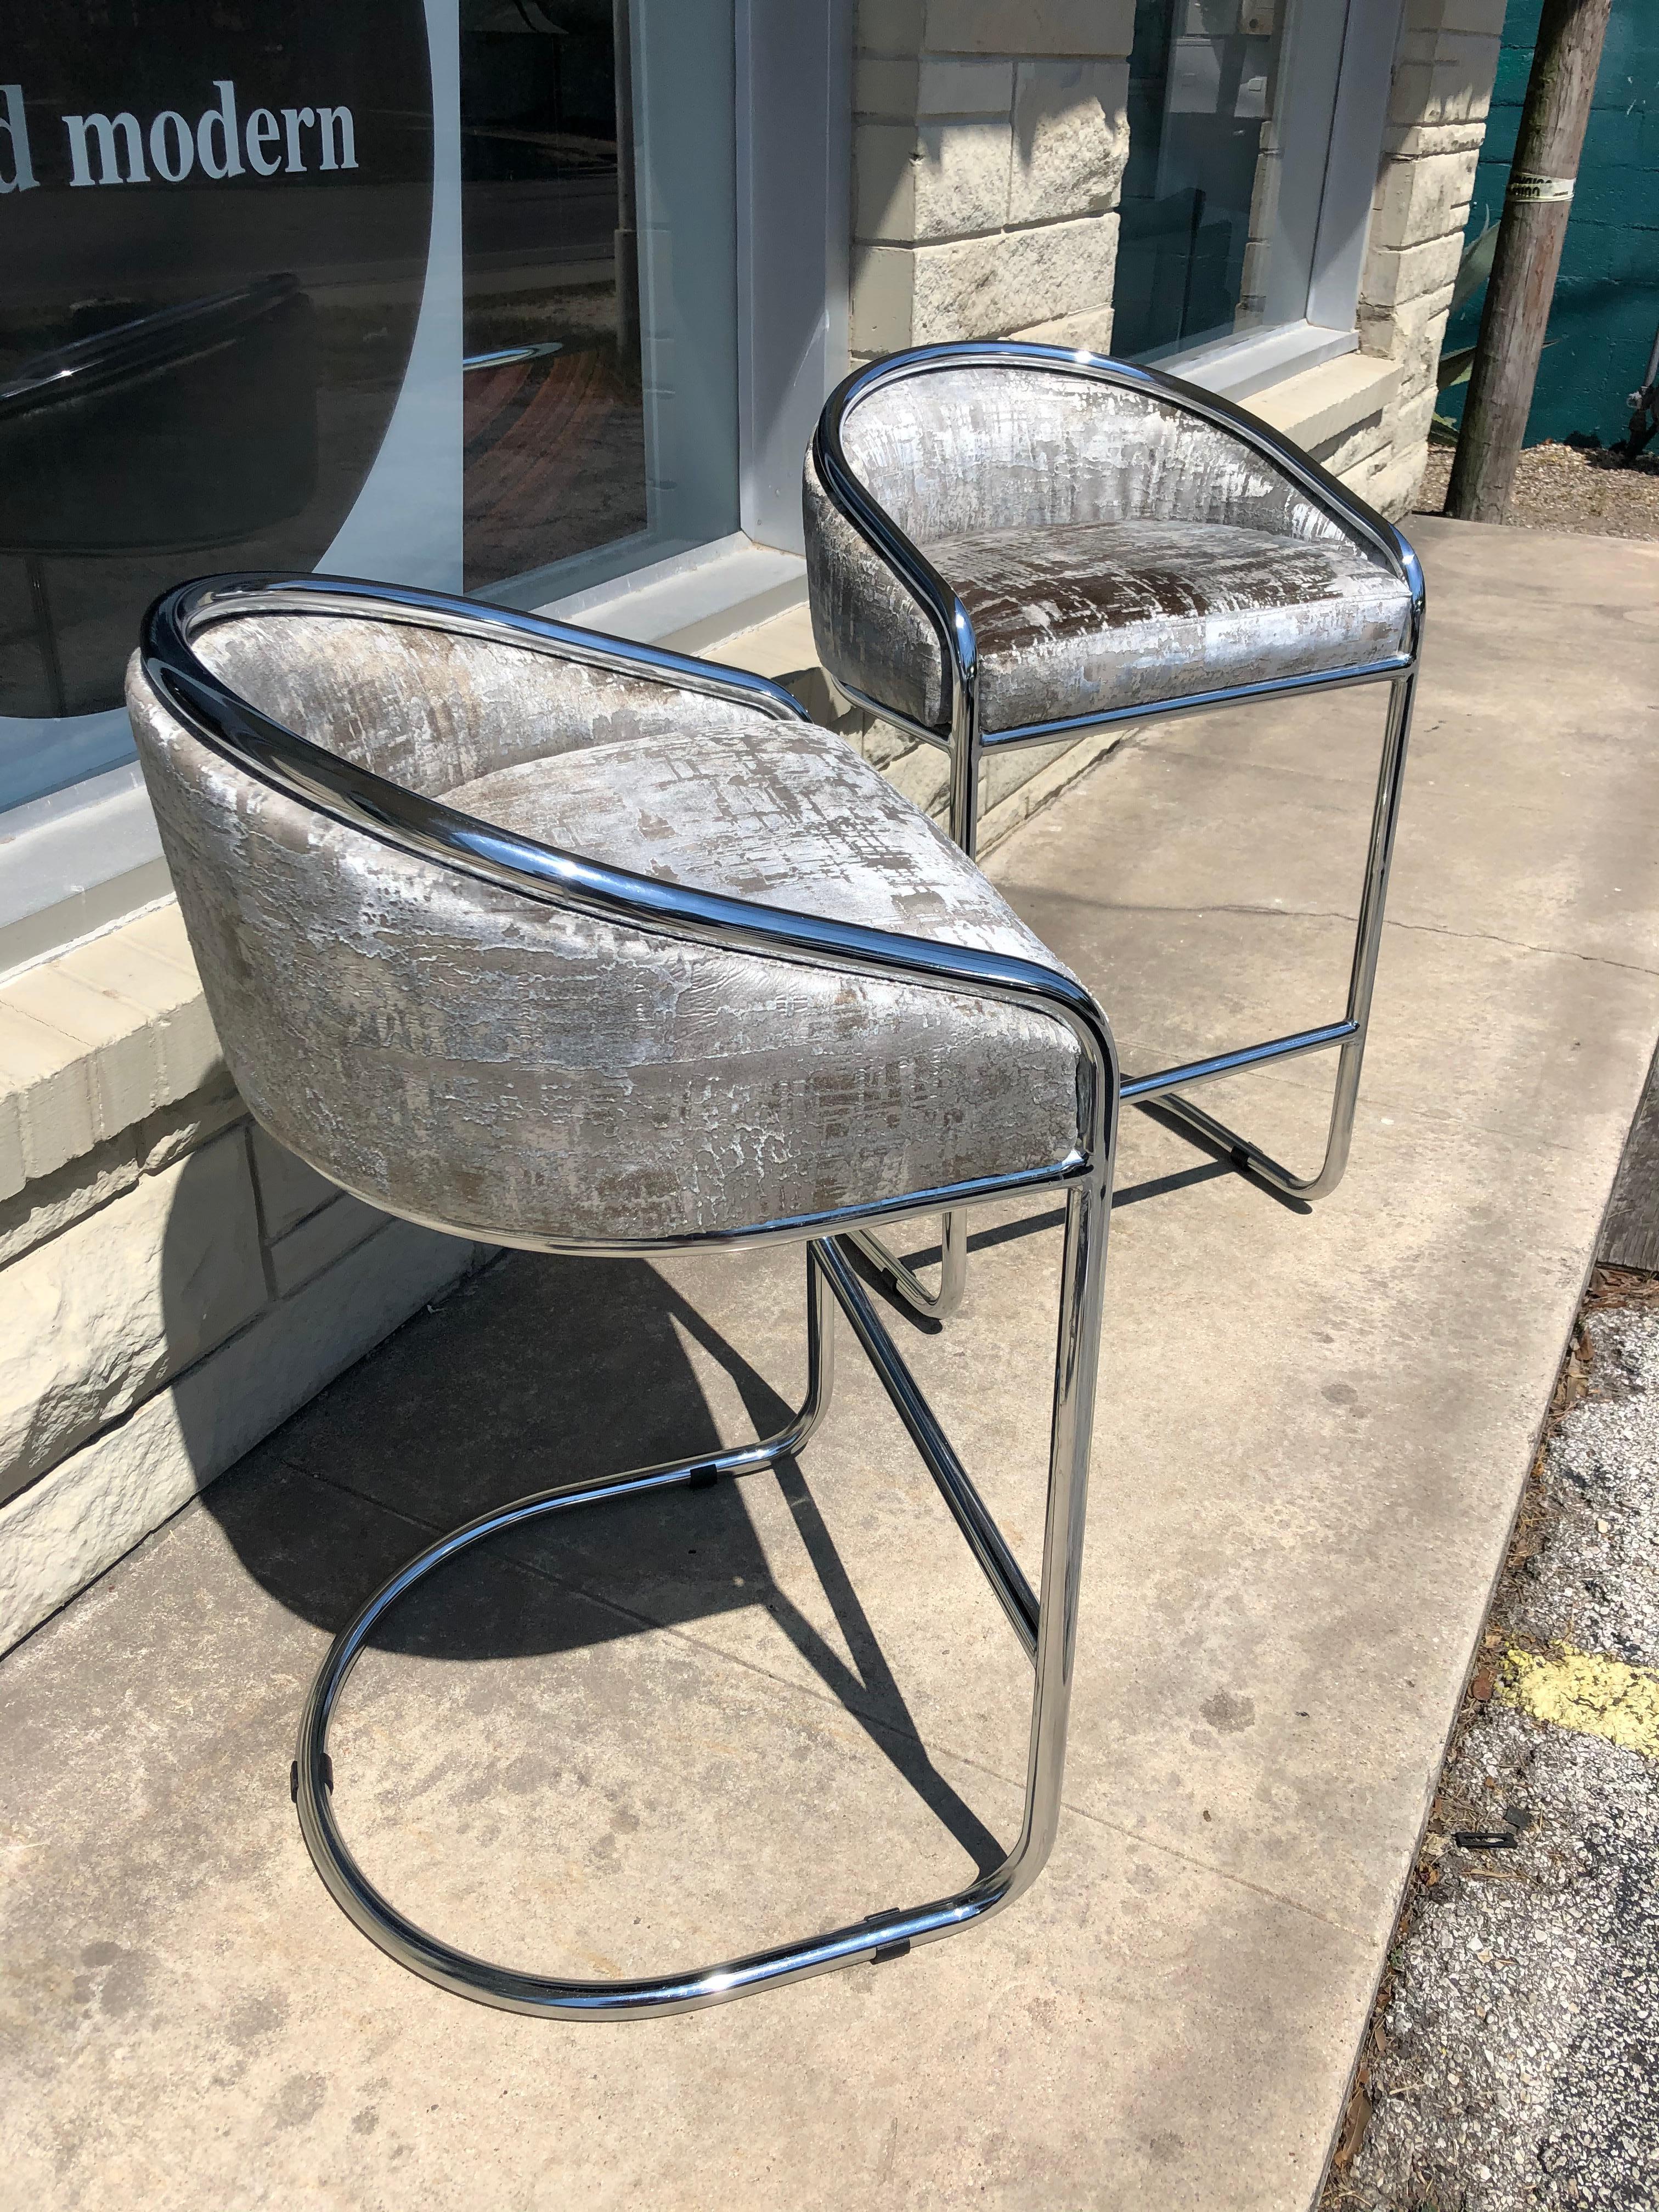 Designed by Anton Lorenz for Thonet, this beautiful pair of chrome bar stools feature Chiseled in Travertine upholstery by Knoll textiles, creating a unique and timeless design. Both are in overall good condition.
circa 1980s. USA.
Dimensions:
20